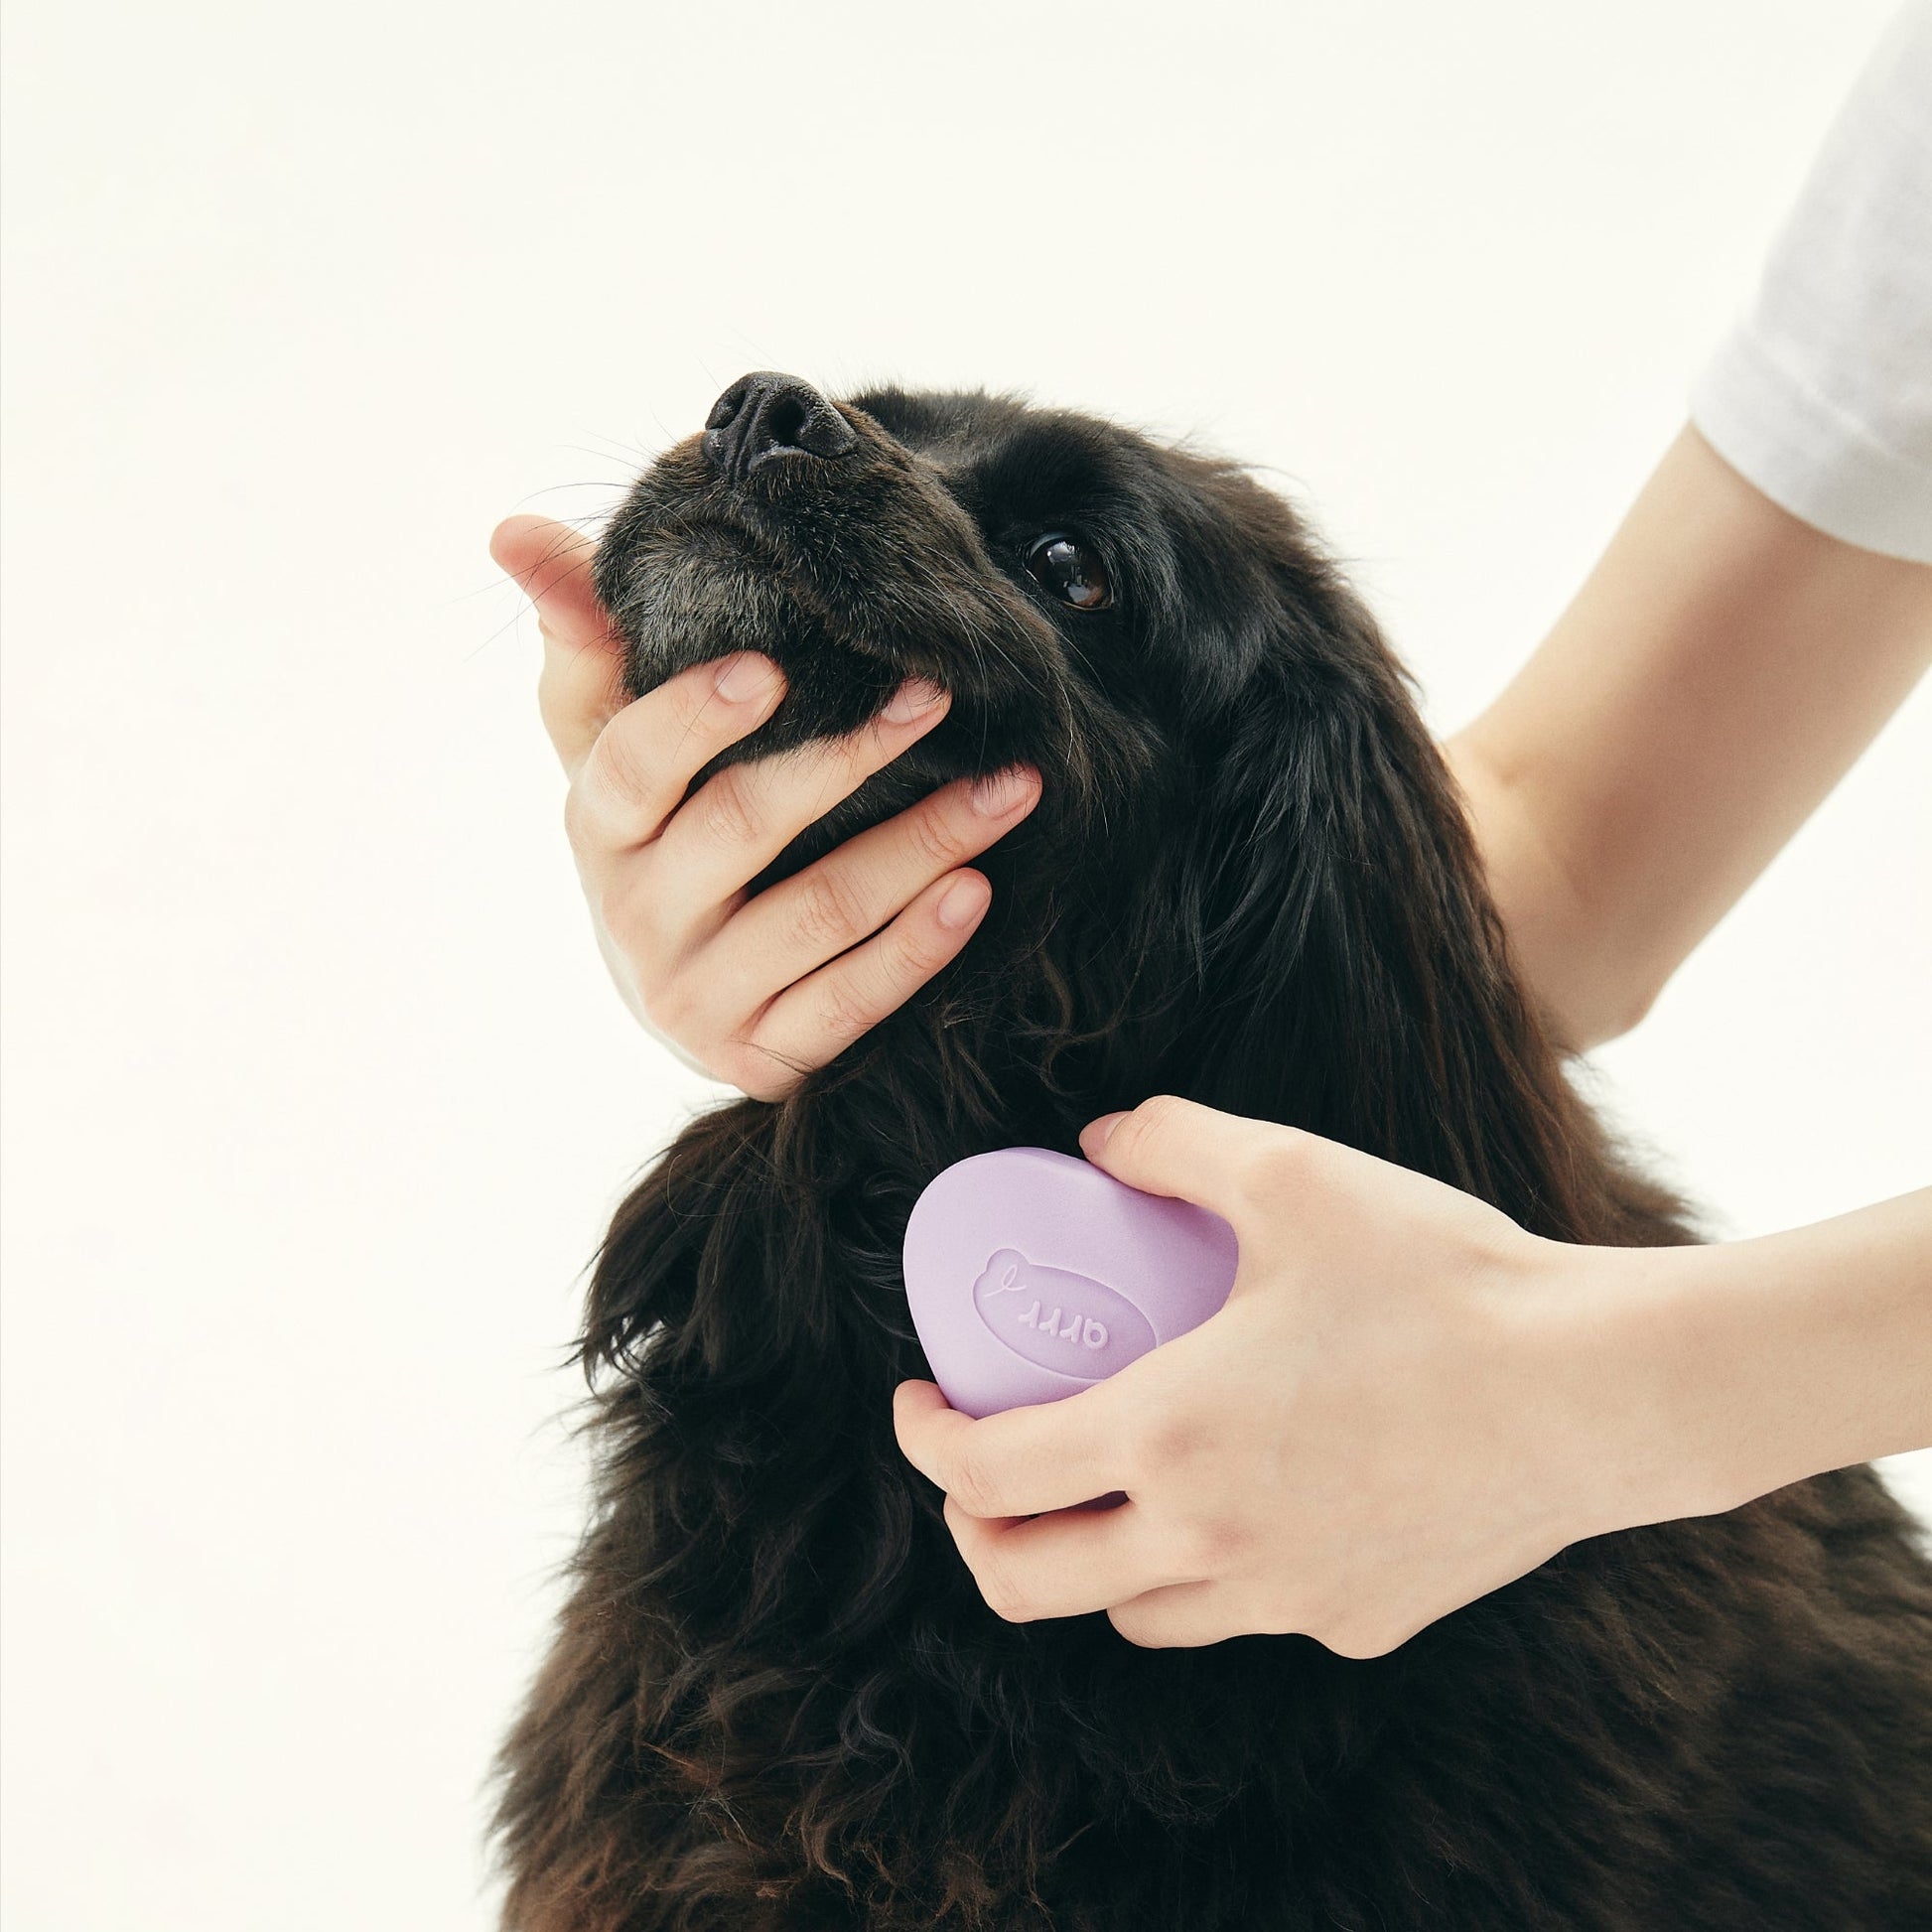 Korea-made massage brush for dogs. 100% natural rubber brush removes loose hair and tangles gently, while the curved design provides a stable grip. The stylish purple color adds a touch of flair to grooming time.